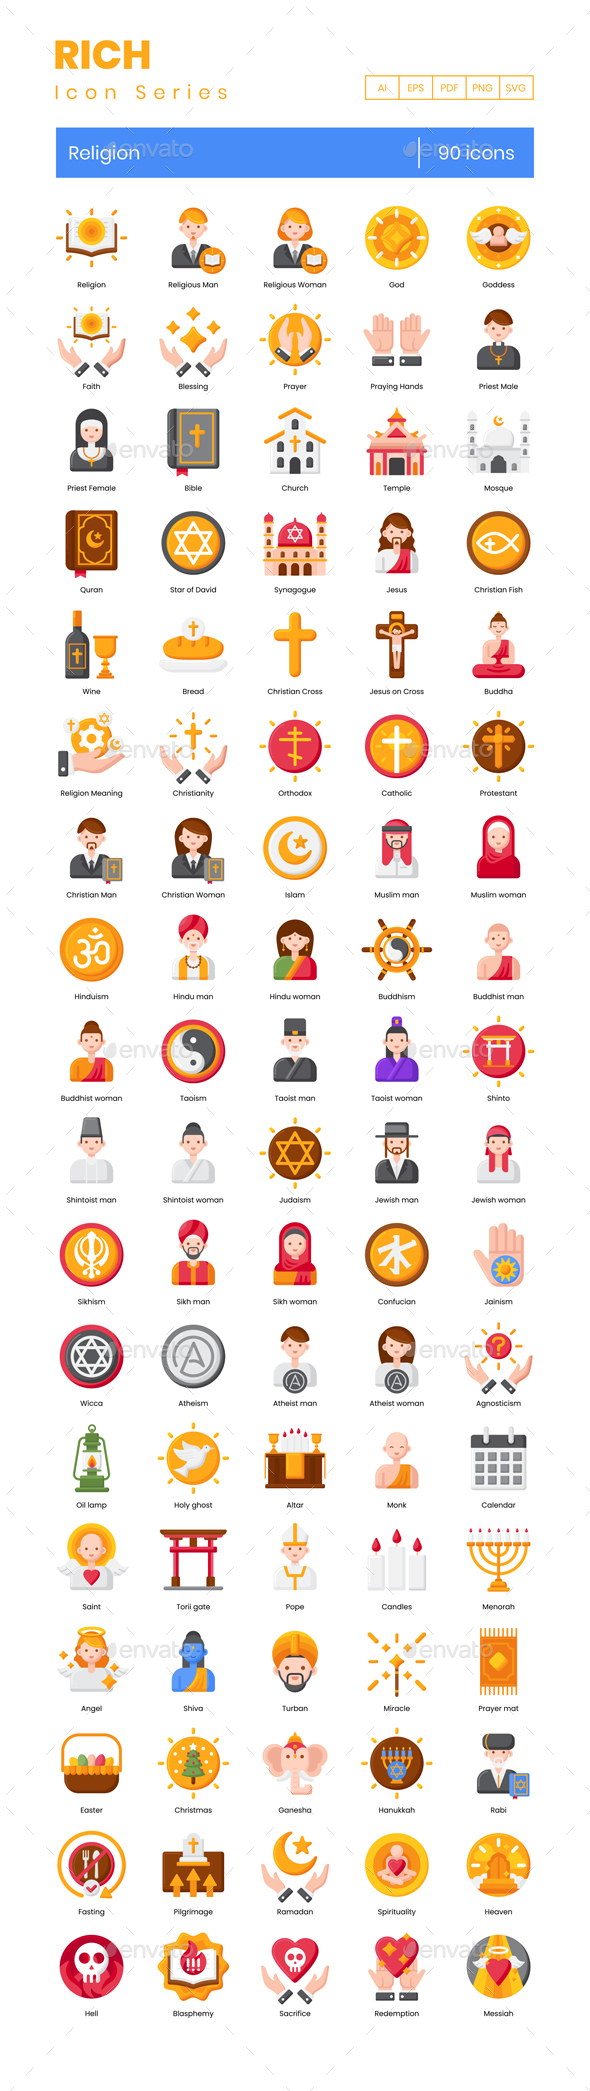 90 Religion Icons | Rich Series